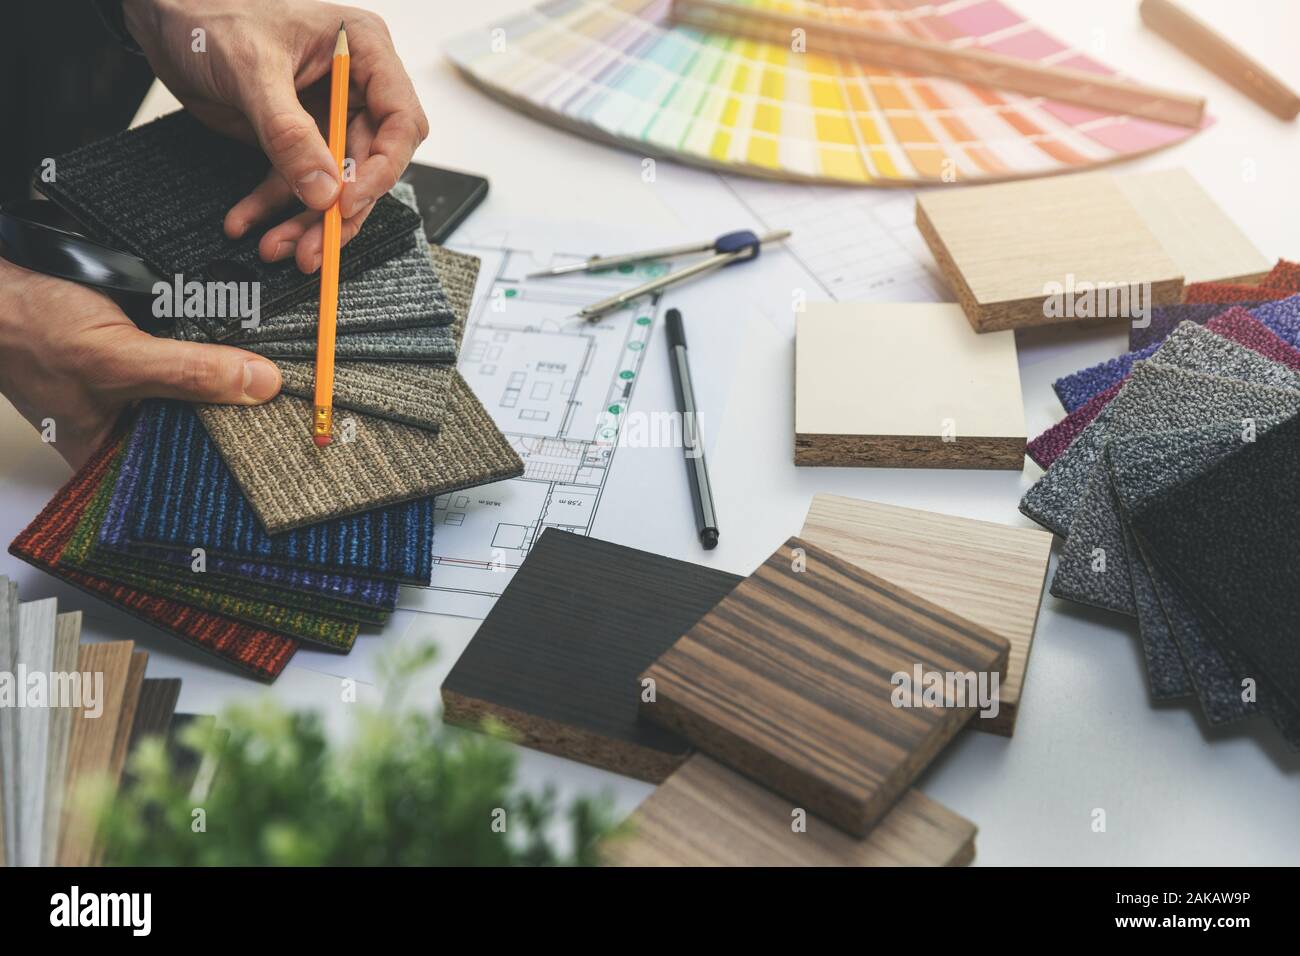 designer choosing flooring and furniture materials from samples for home interior design project Stock Photo